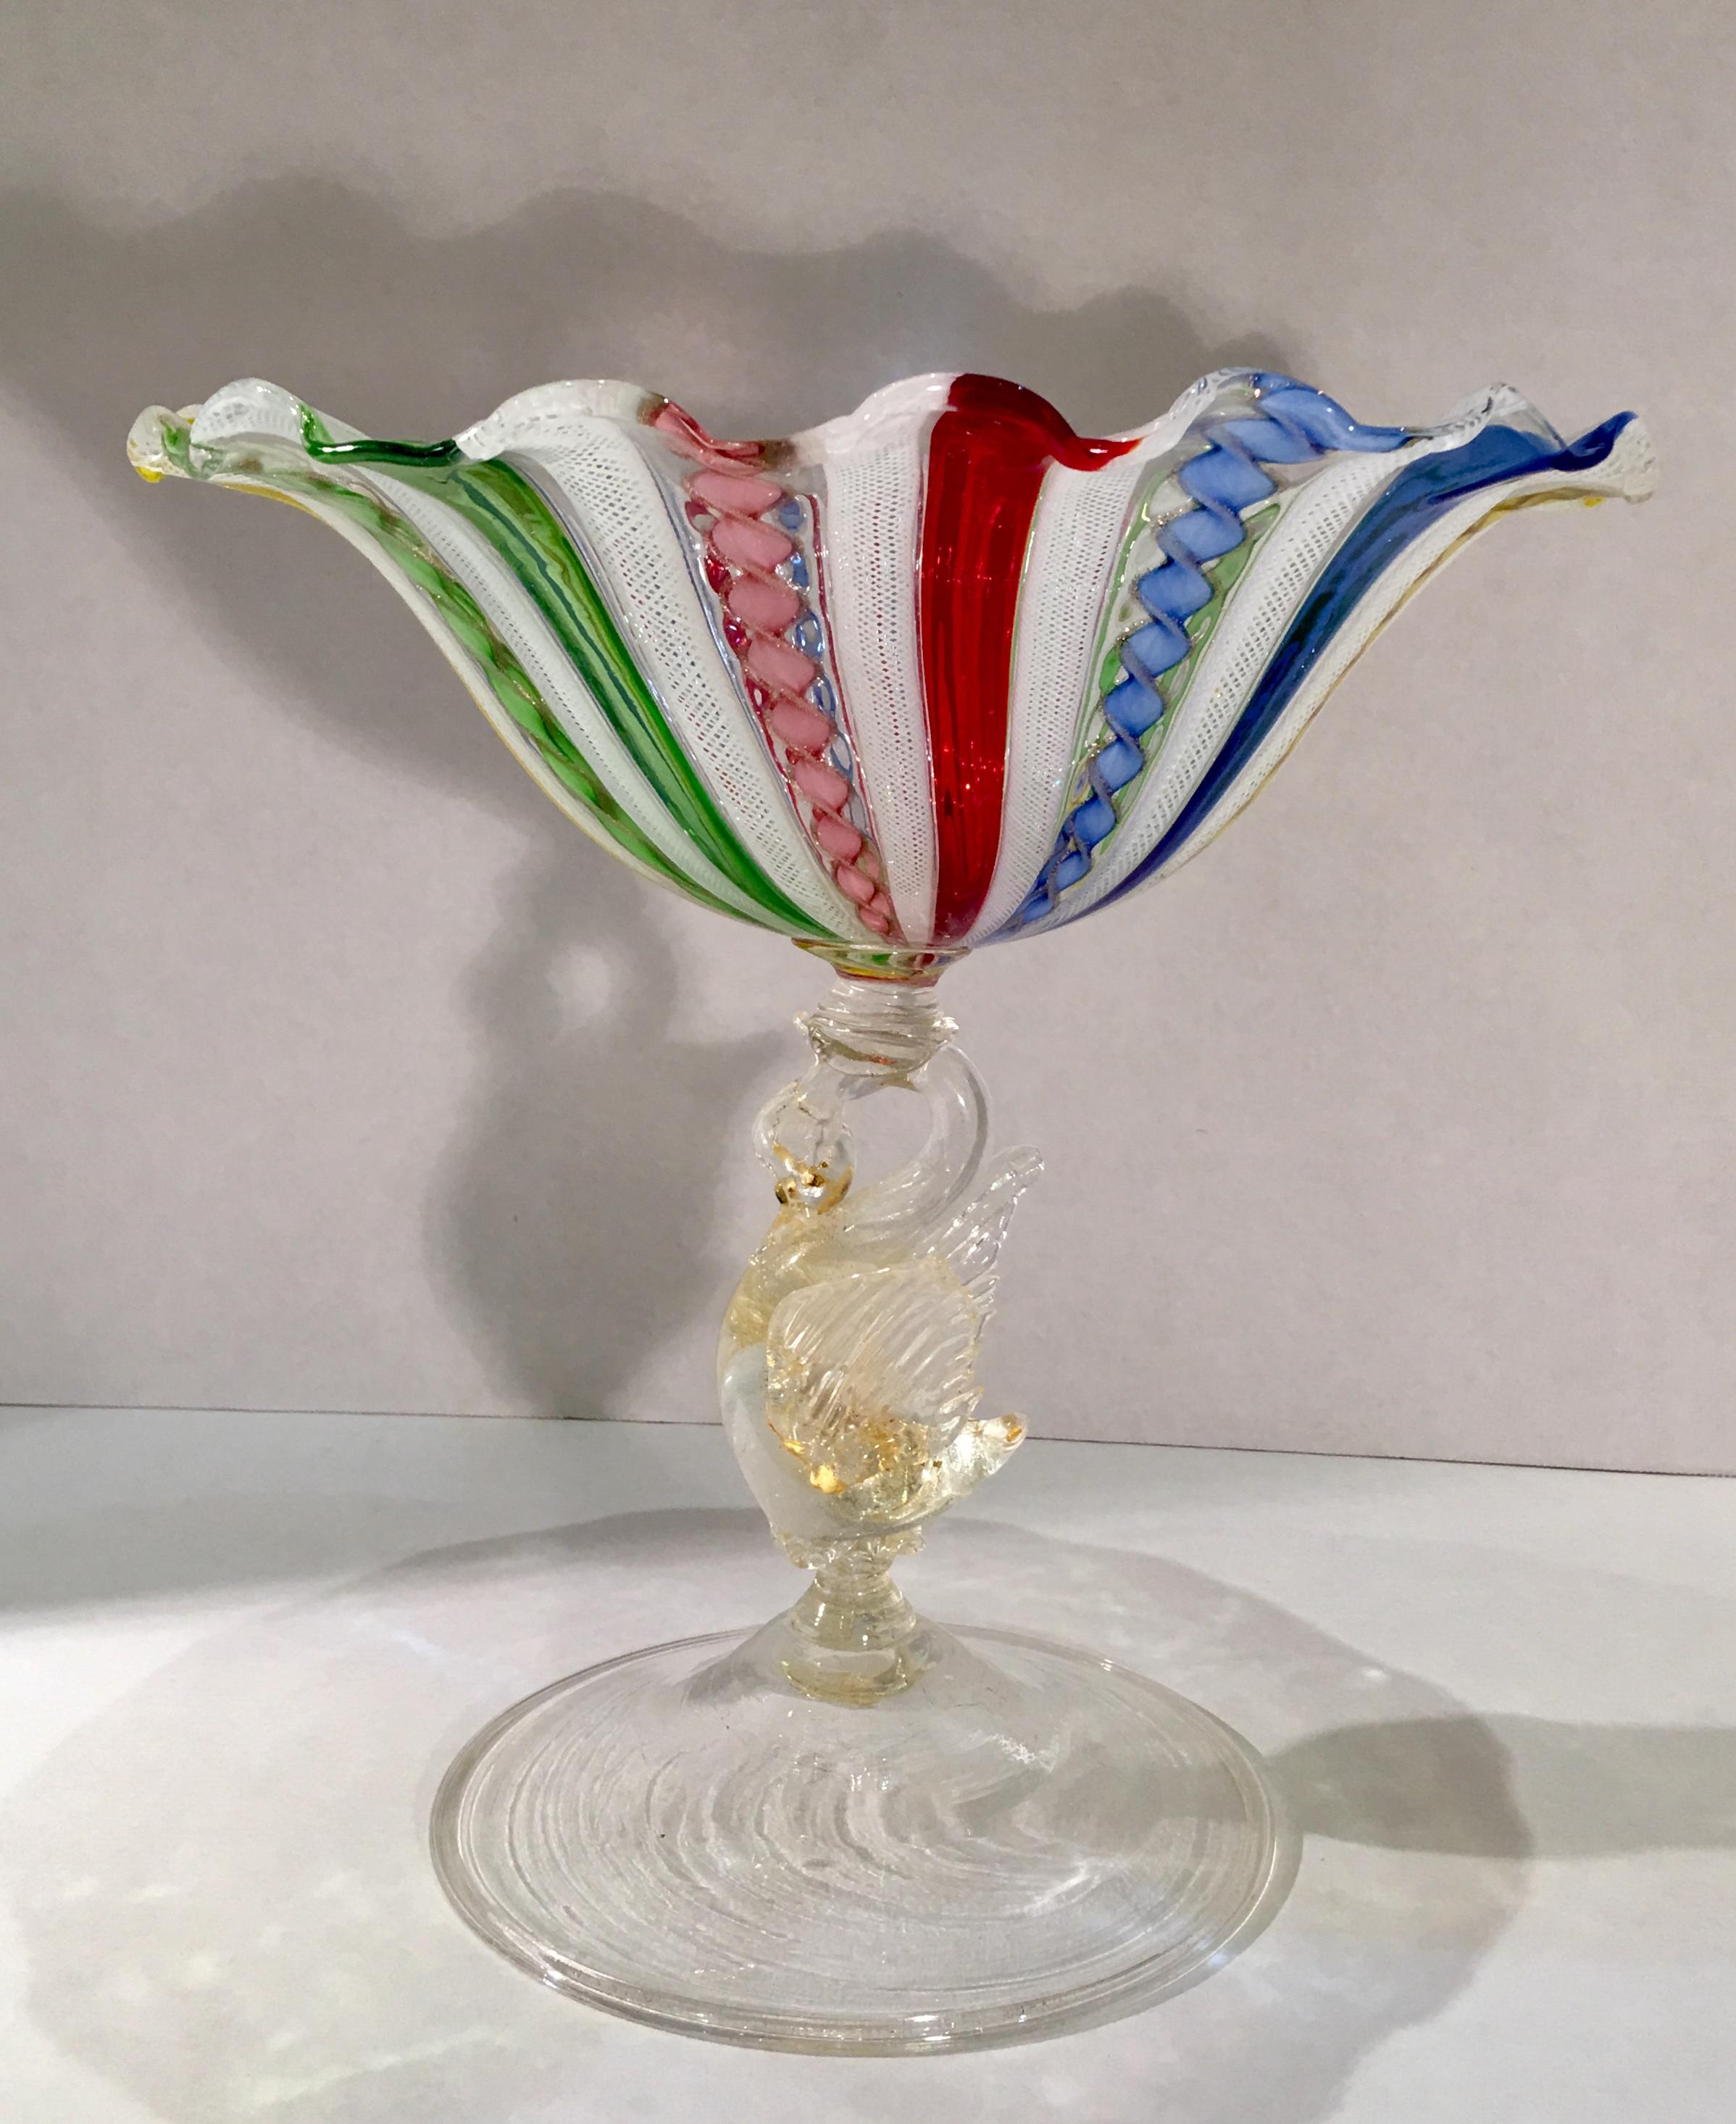 Hand-Crafted Antique Venetian Colorful Latticino Murano Art Glass Compote Dish with Swan Stem